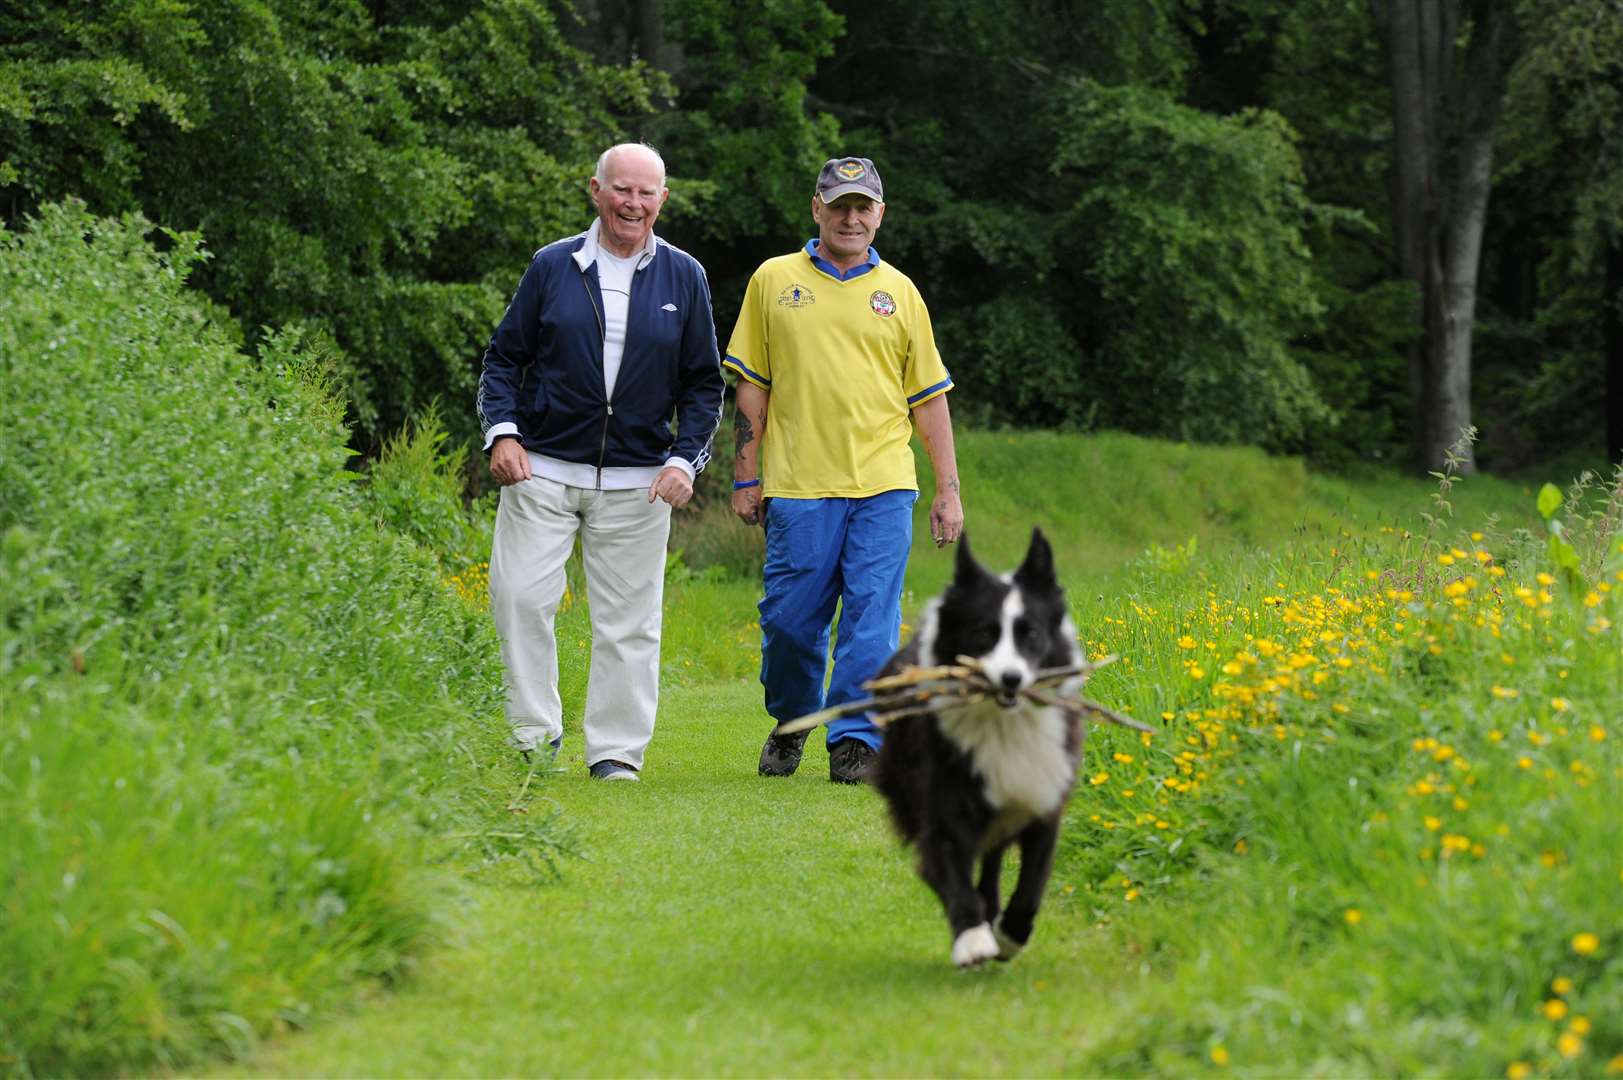 MIke Christe and Geordie Ross with Collie dog Glen at the overgrown playing fields